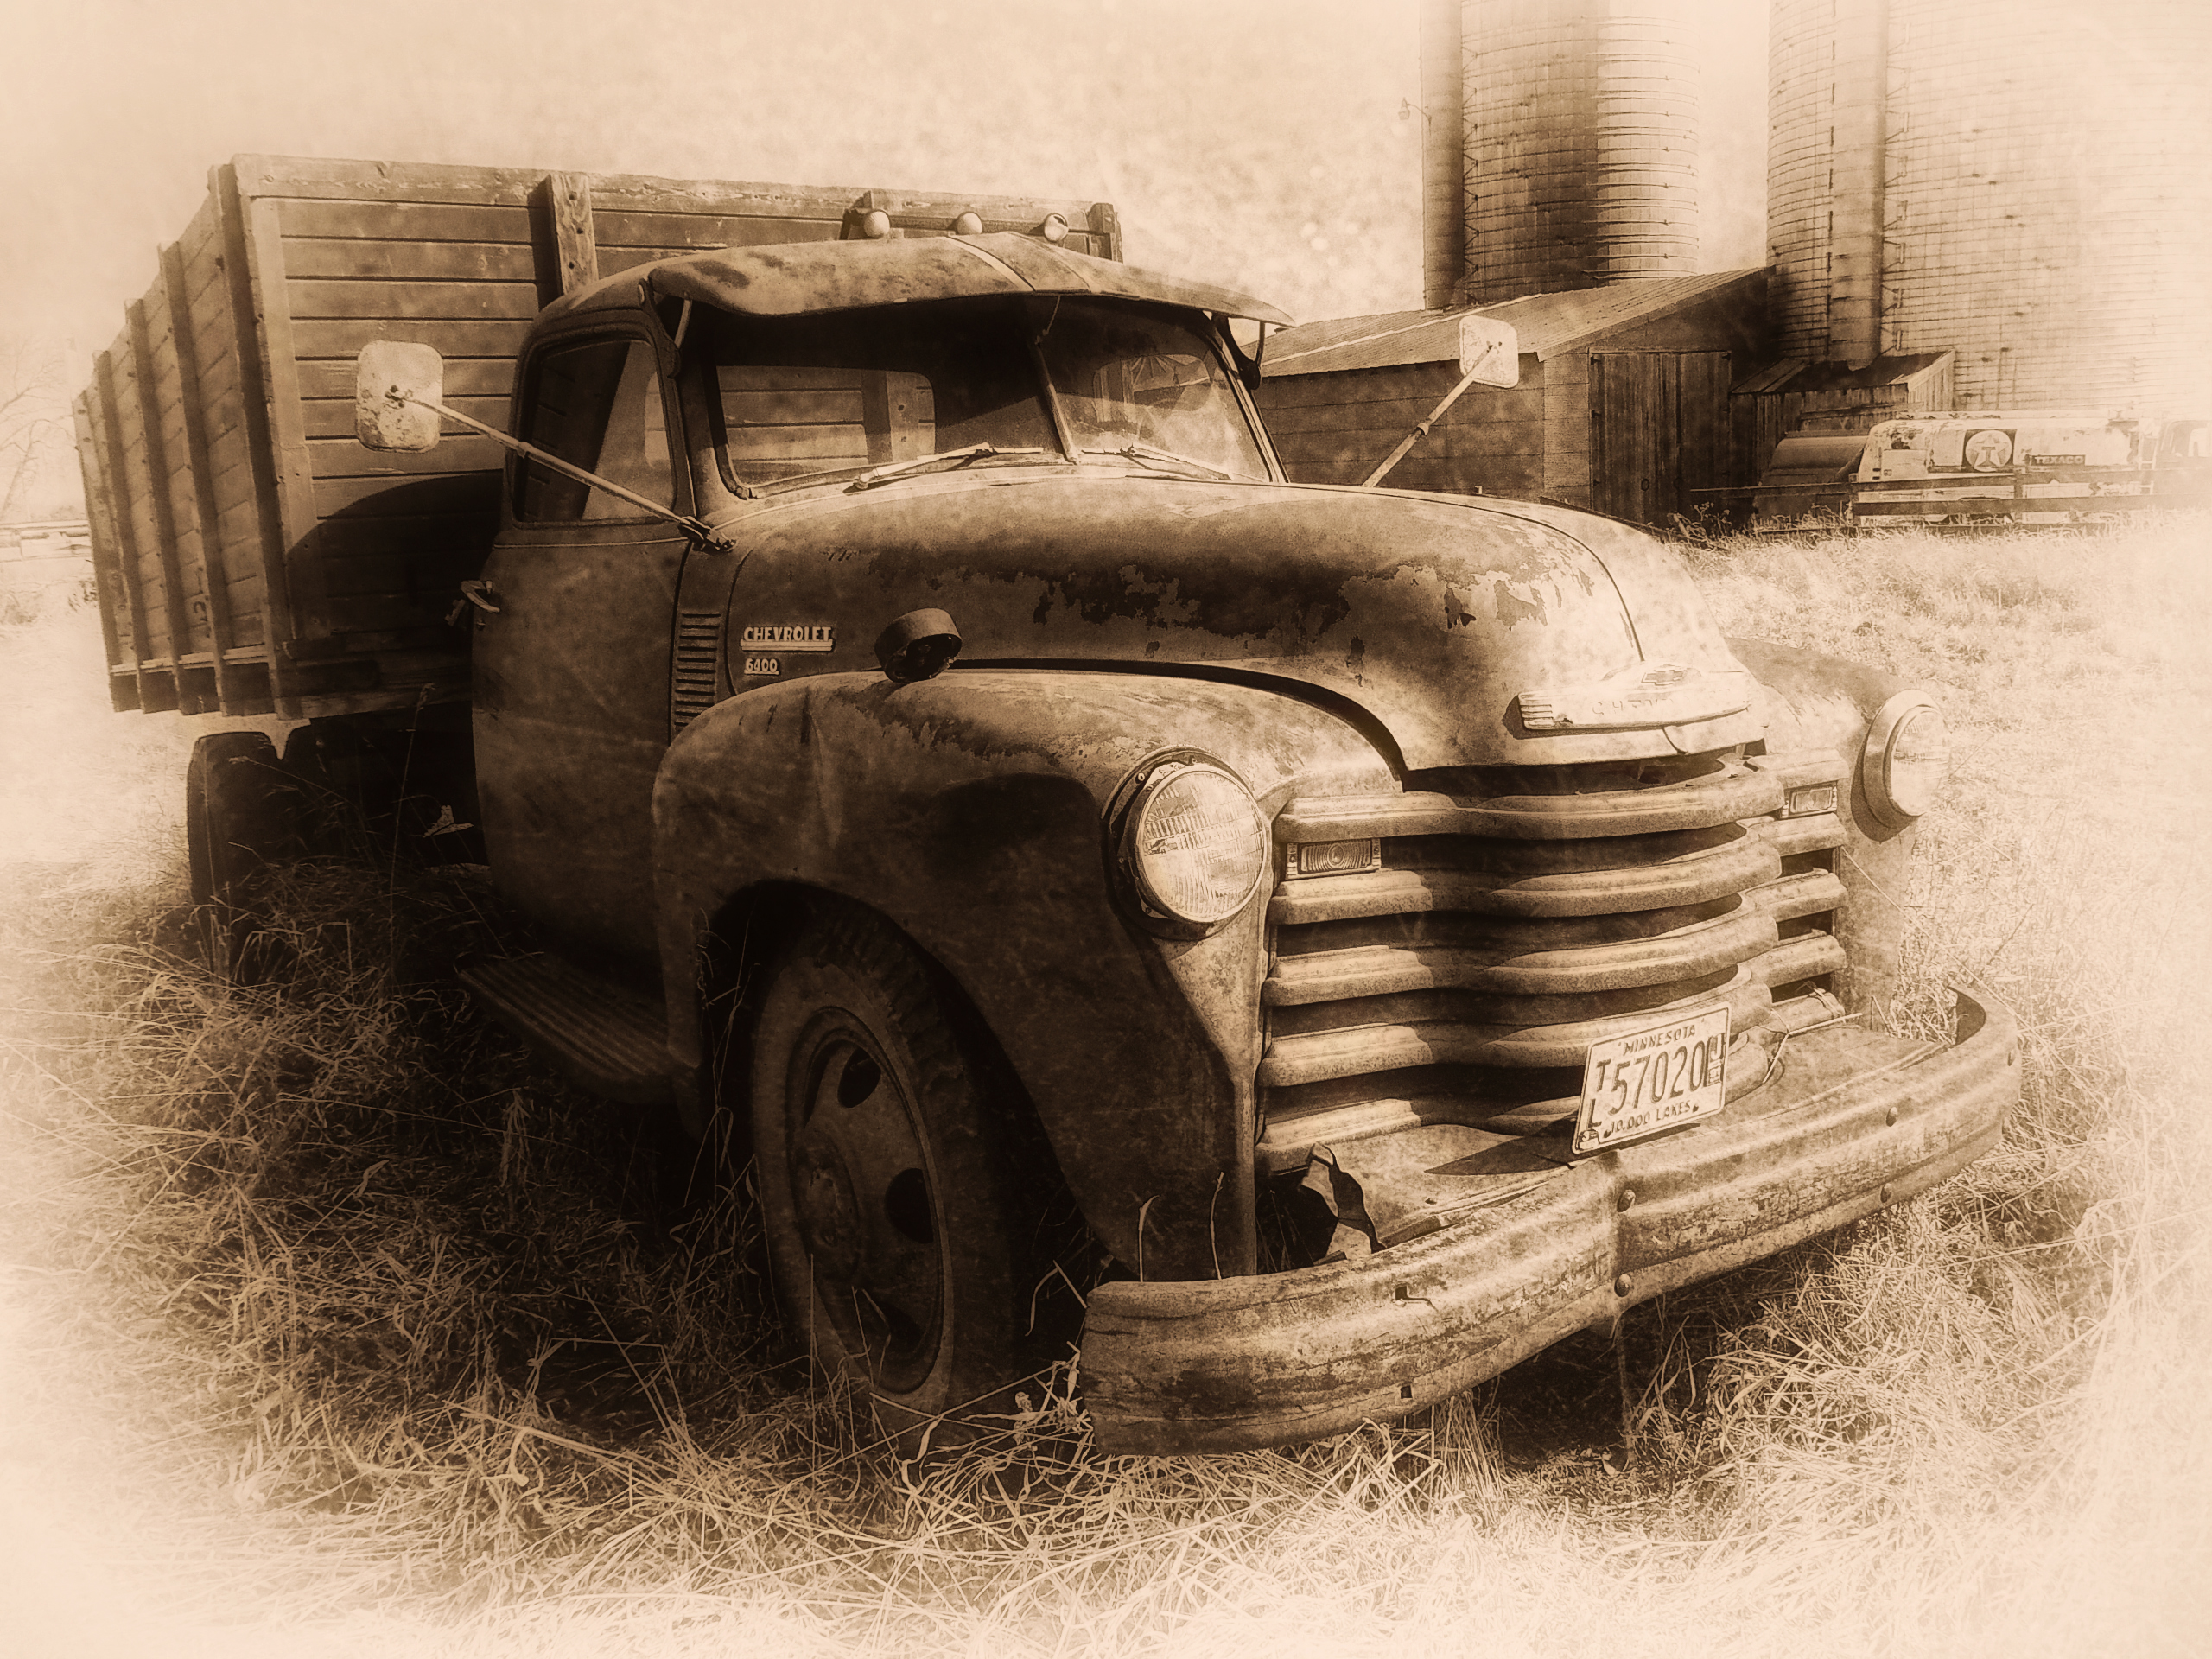 Wallpaper, abandoned, farm, texture, USA, Vintage car, Chevrolet, Truck, Minnesota, Chevy, rural, country, blinkagain, classic, texturized, magicunicornverybest, black and white, monochrome photography, automotive design, automotive exterior, compact